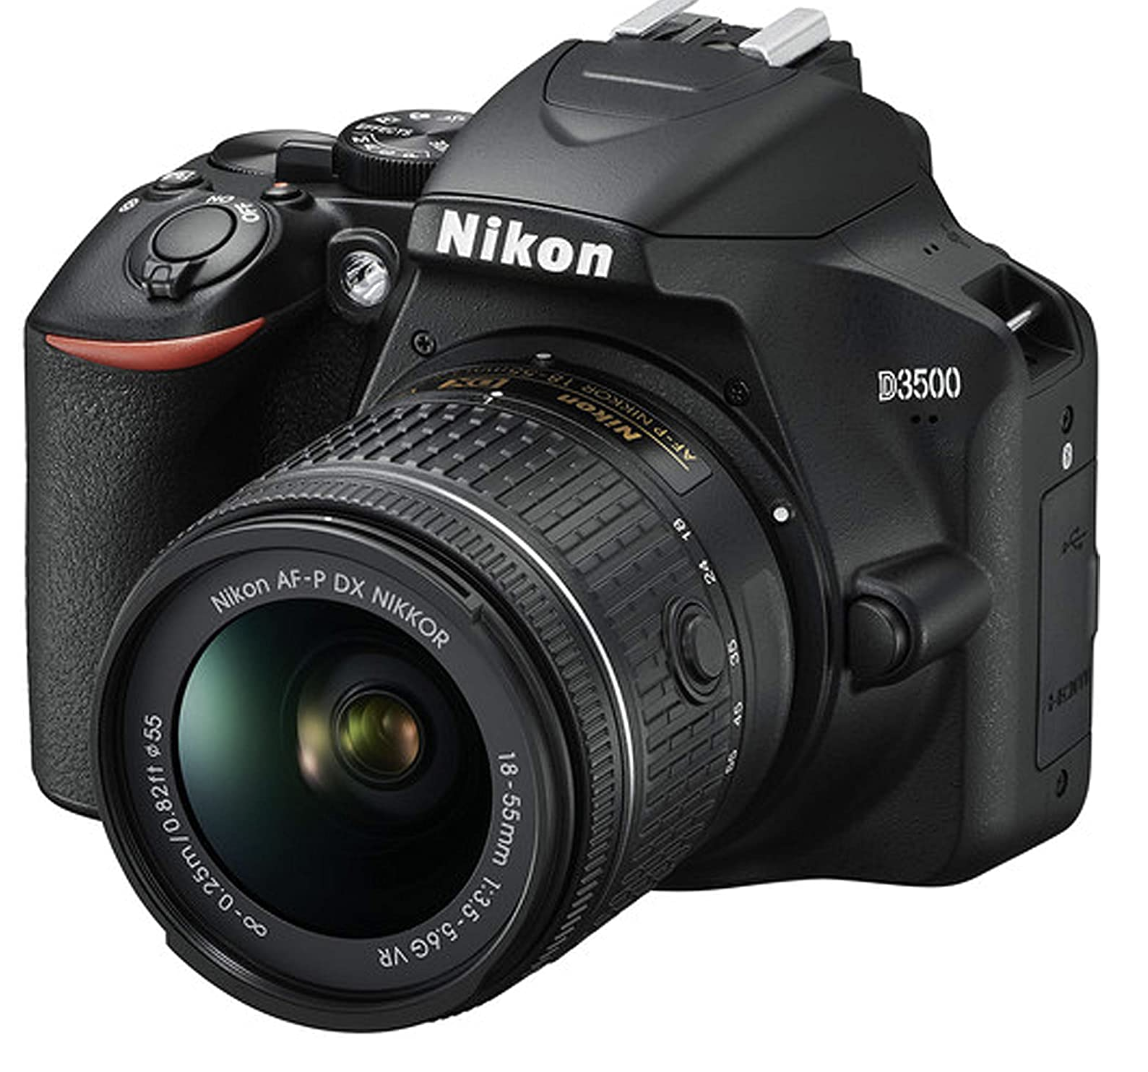 Top 10 best cameras to use for real estate photography Nikon D3500